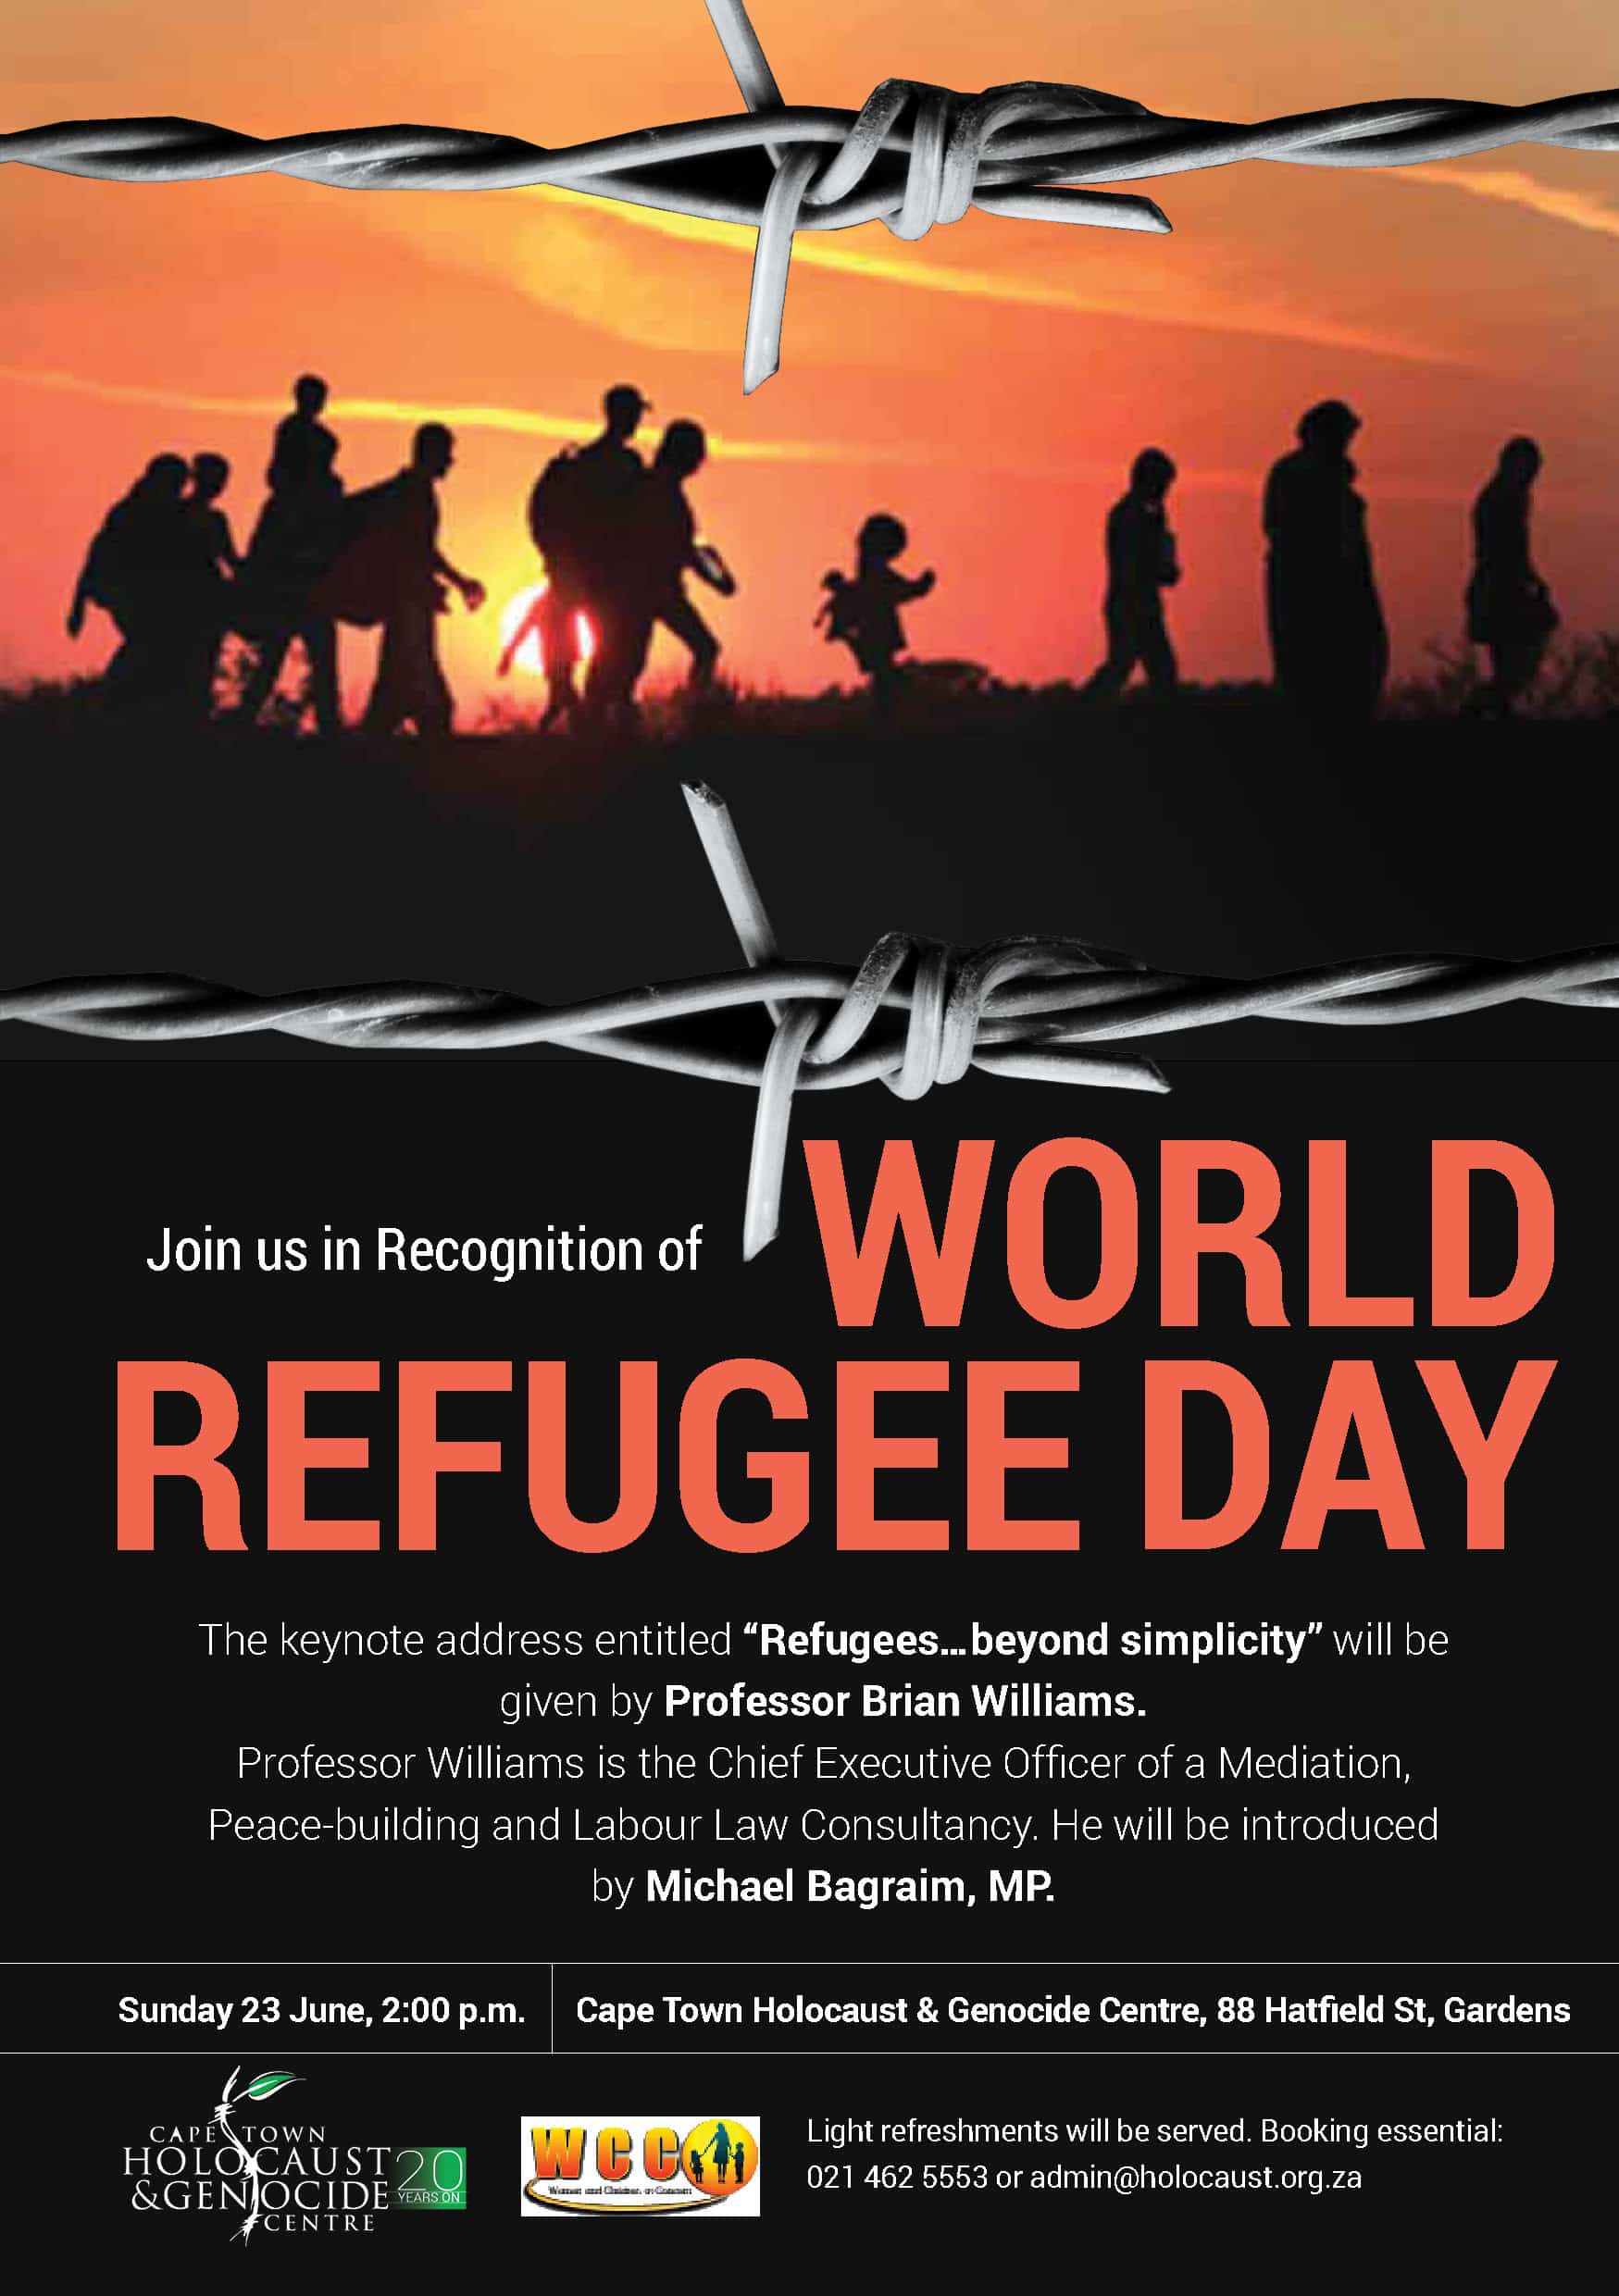 World Refugee Day Cape Town Holocaust & Genocide Centre